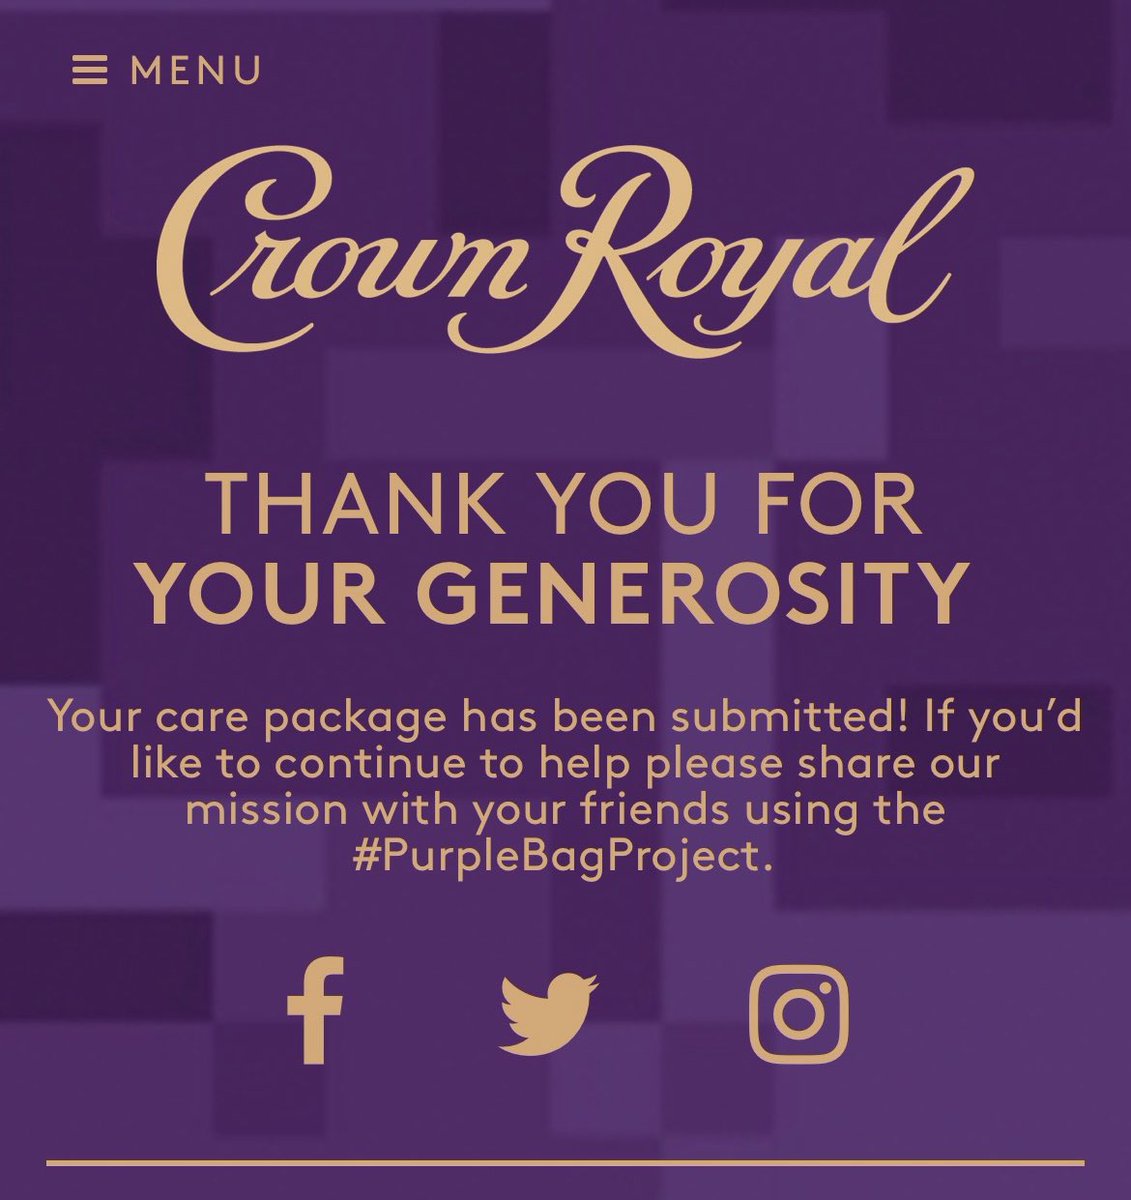 This holiday season you can support our troops overseas through the #PurpleBagProject & it’s free to do so! 

Hats off to @CrownRoyal for their generosity & efforts in supporting our soldiers & vets! 💜🇺🇸🎅